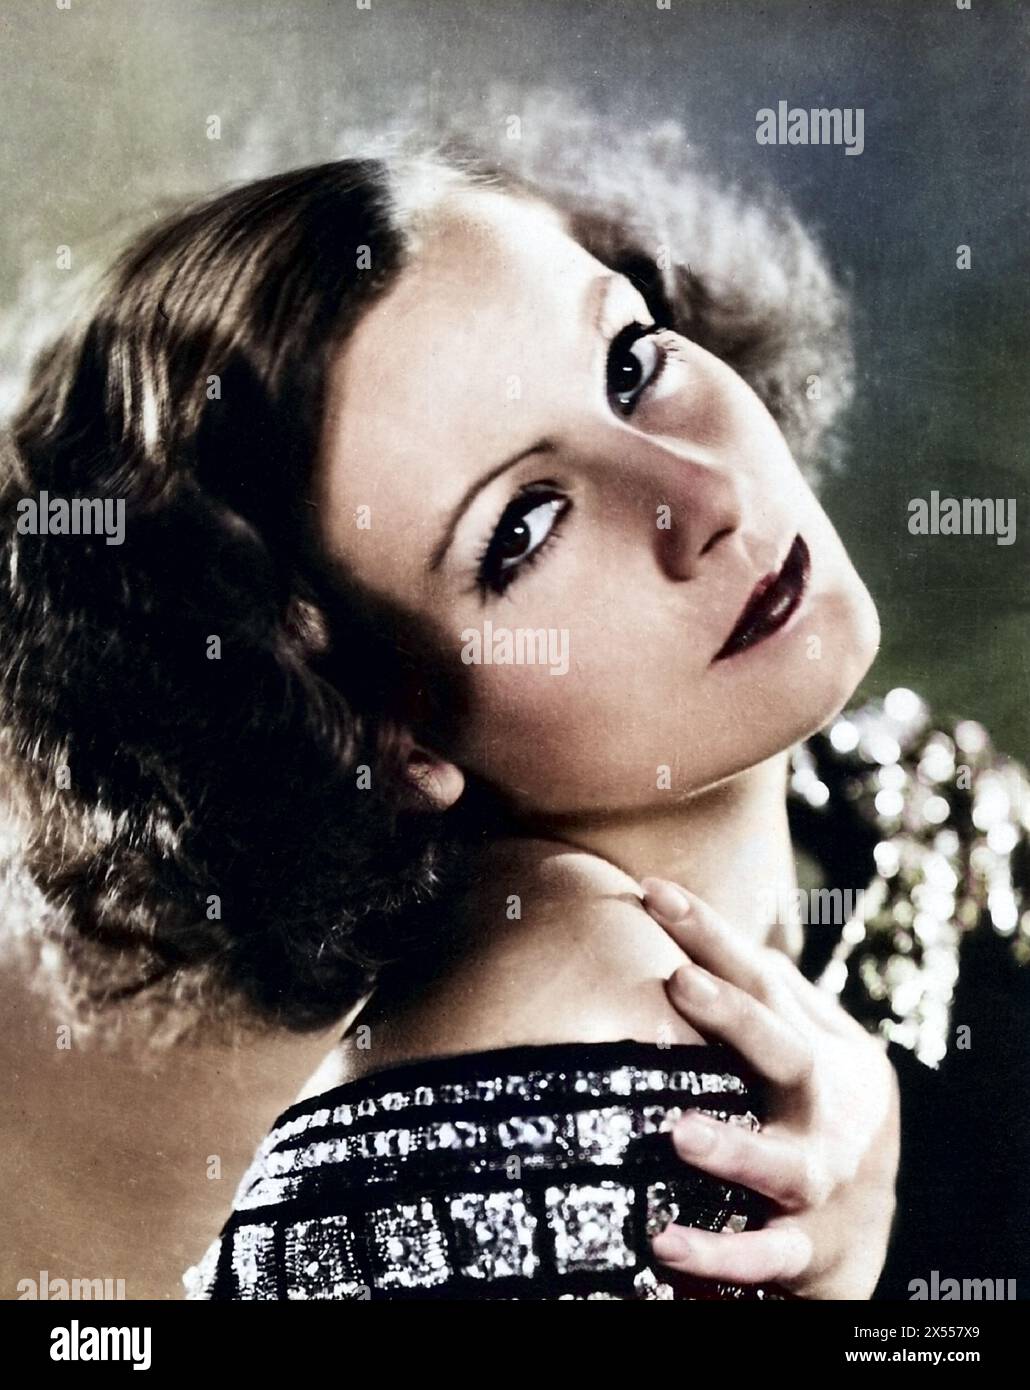 Garbo, Greta, 18.9.1905 - 15.4.1990, Swedish actress, portrait, late 1920s, ADDITIONAL-RIGHTS-CLEARANCE-INFO-NOT-AVAILABLE Stock Photo